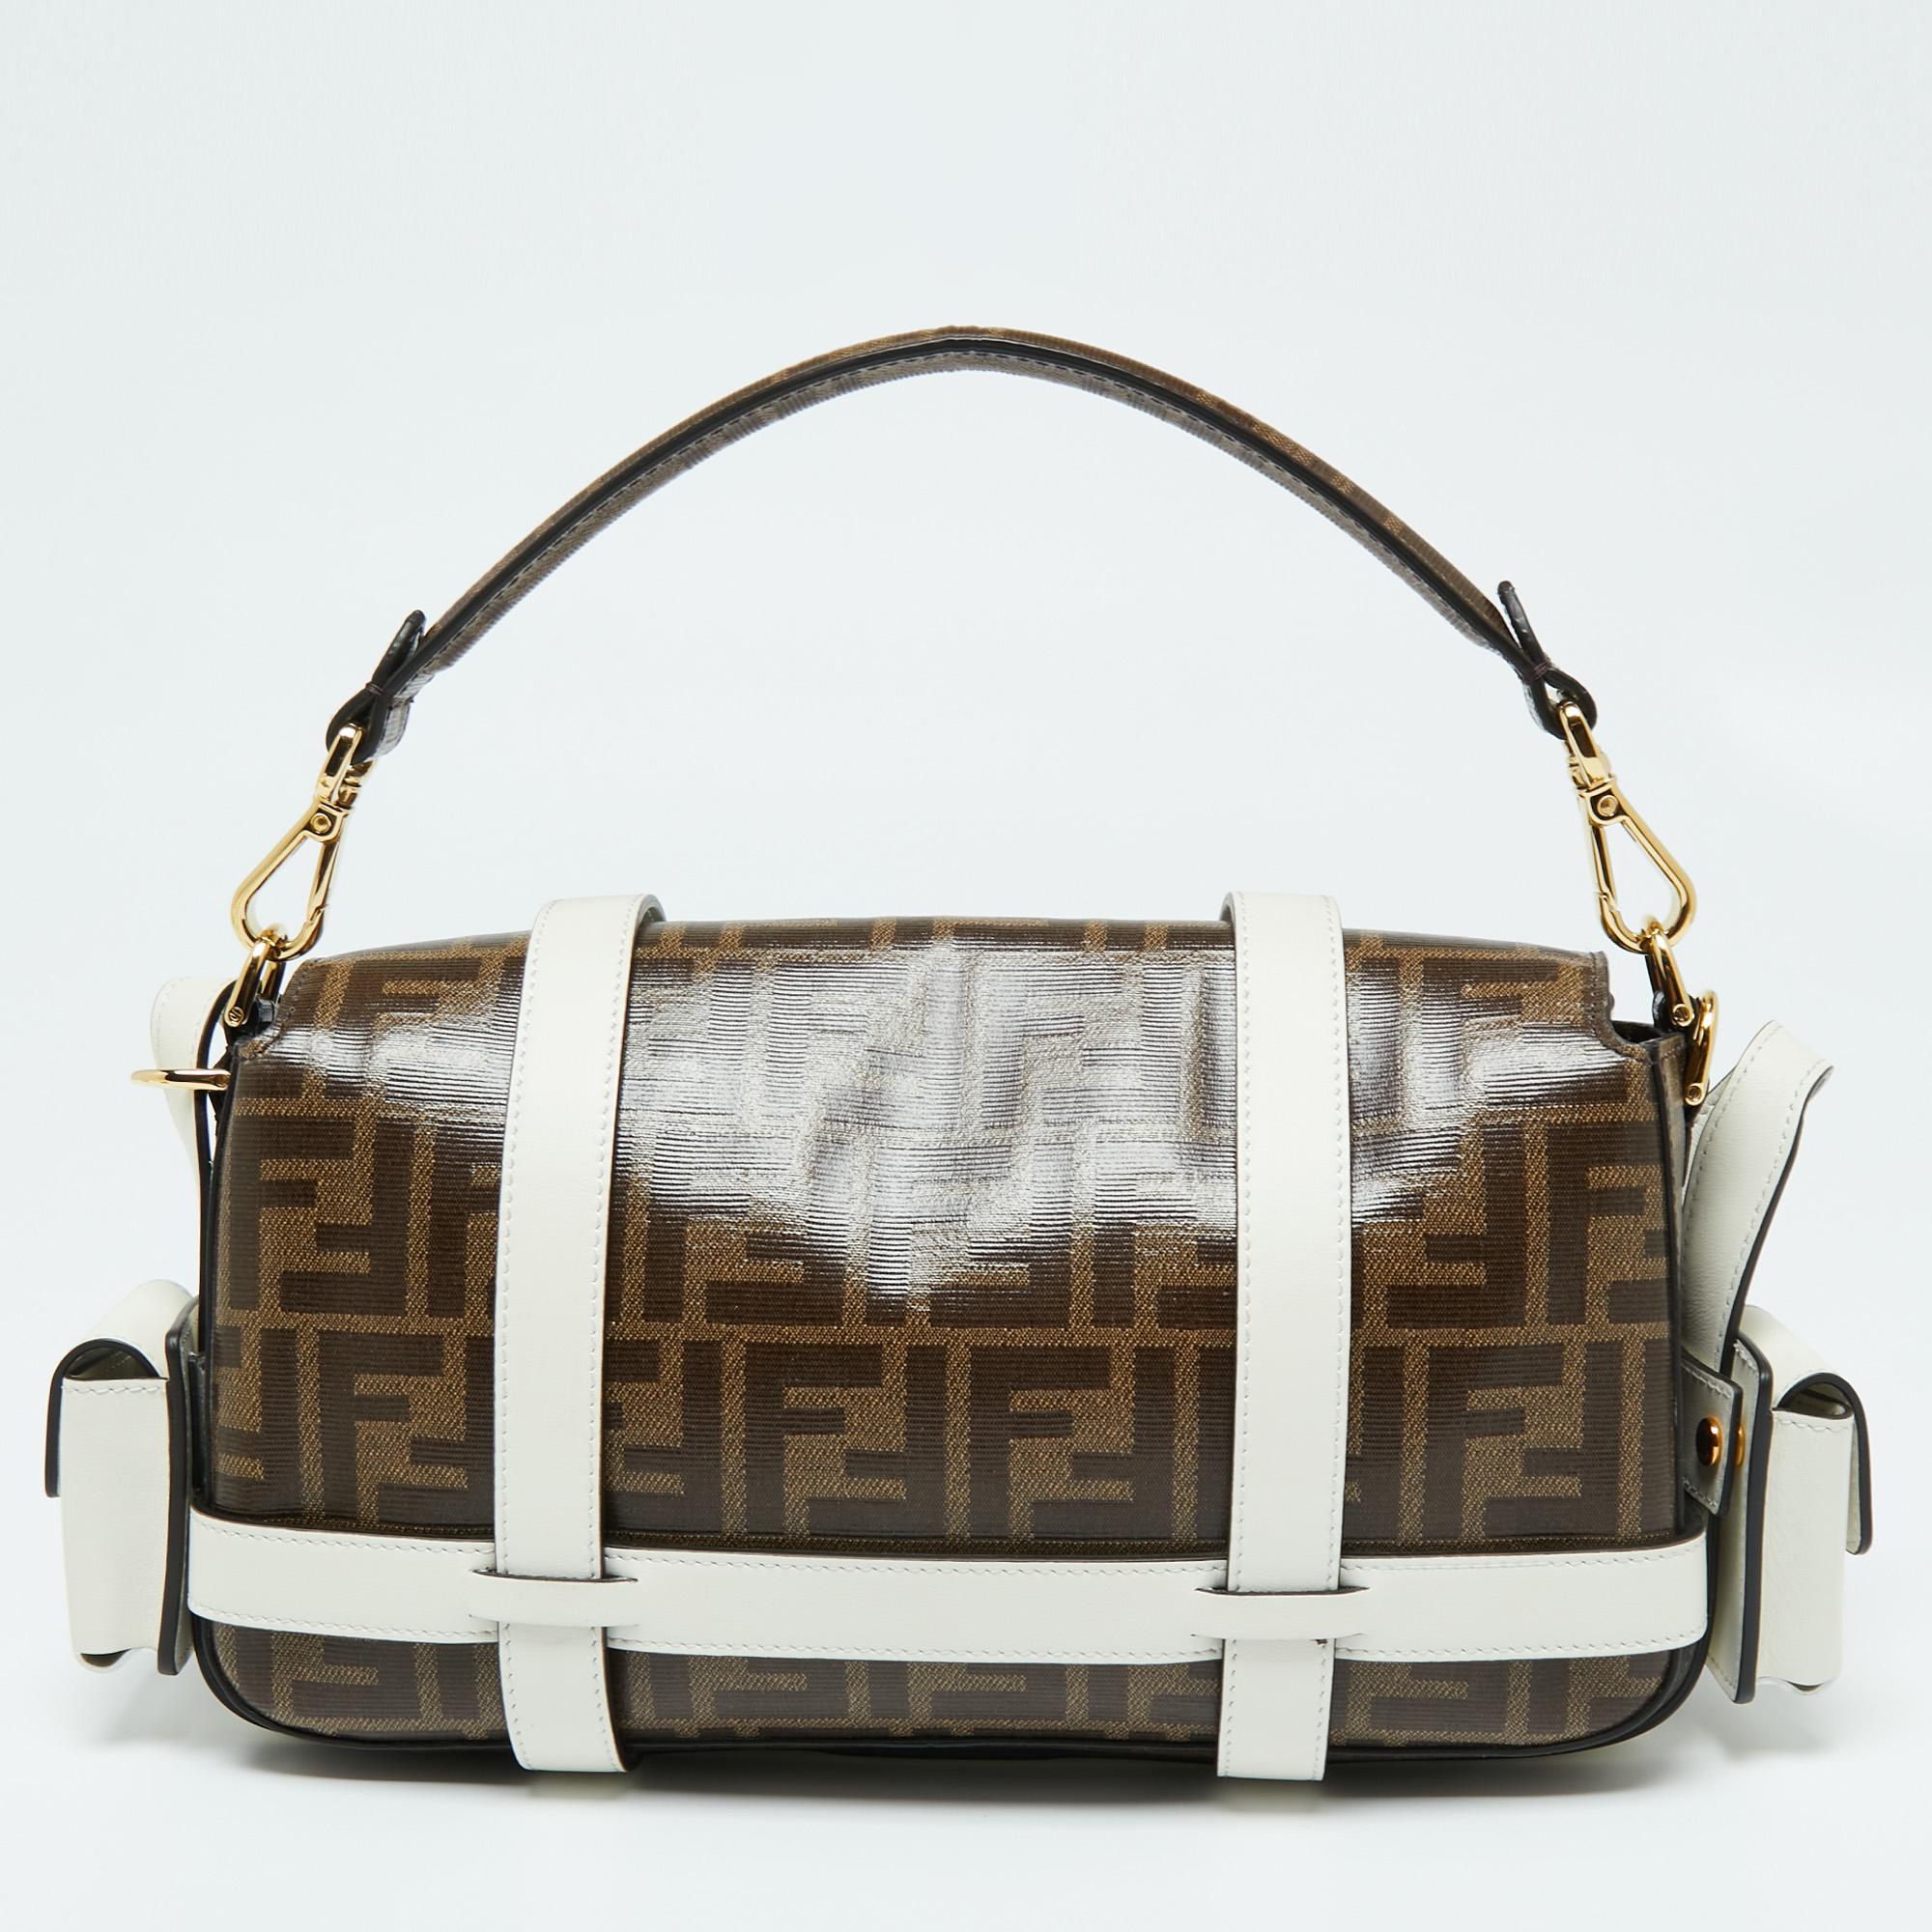 A perfect bag to take for shopping or otherwise, this Baguette bag from Fendi is crafted from coated canvas and leather. It features a front flap secured with a gold-tone, logo-engraved snap closure, a shoulder strap, and a spacious fabric-lined